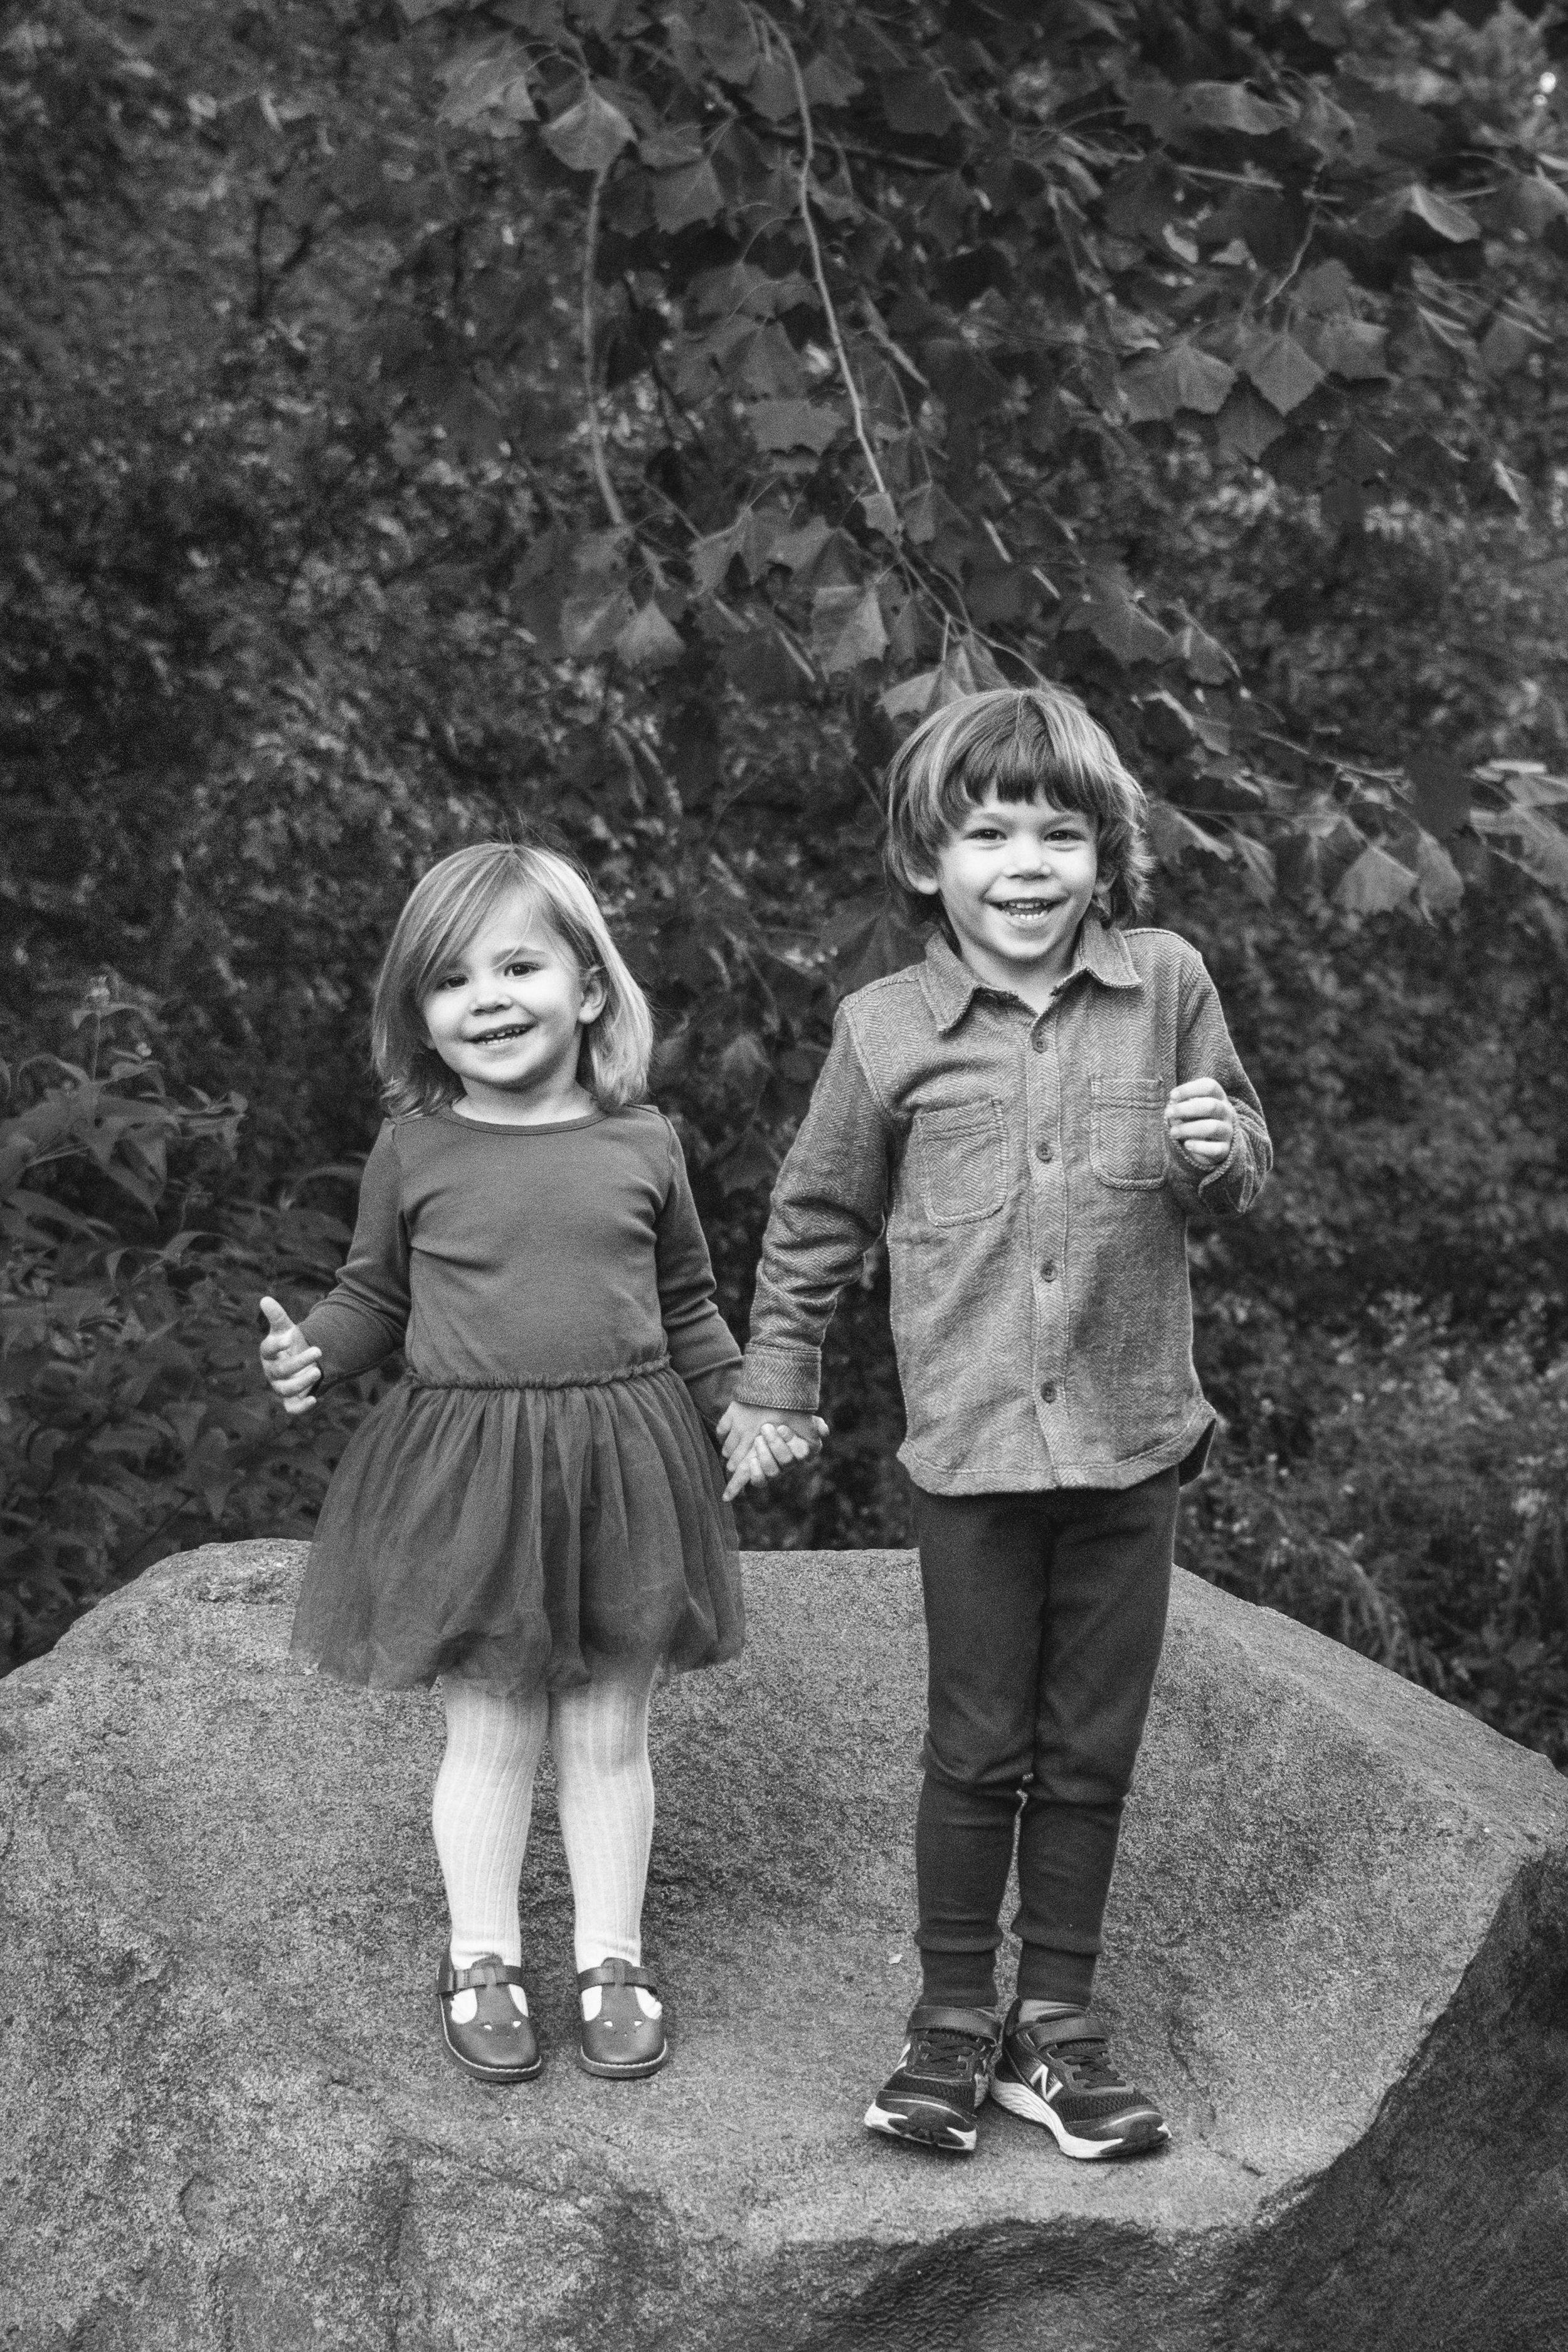  Black and white lifestyle portrait of a brother and sister holding hands in Central Park by Nicole Hawkins Photography. standing on a rock brother and sister #NicoleHawkinsPhotography #NicoleHawkinsFamilies #NJphotographers #familyphotos #CentralPar